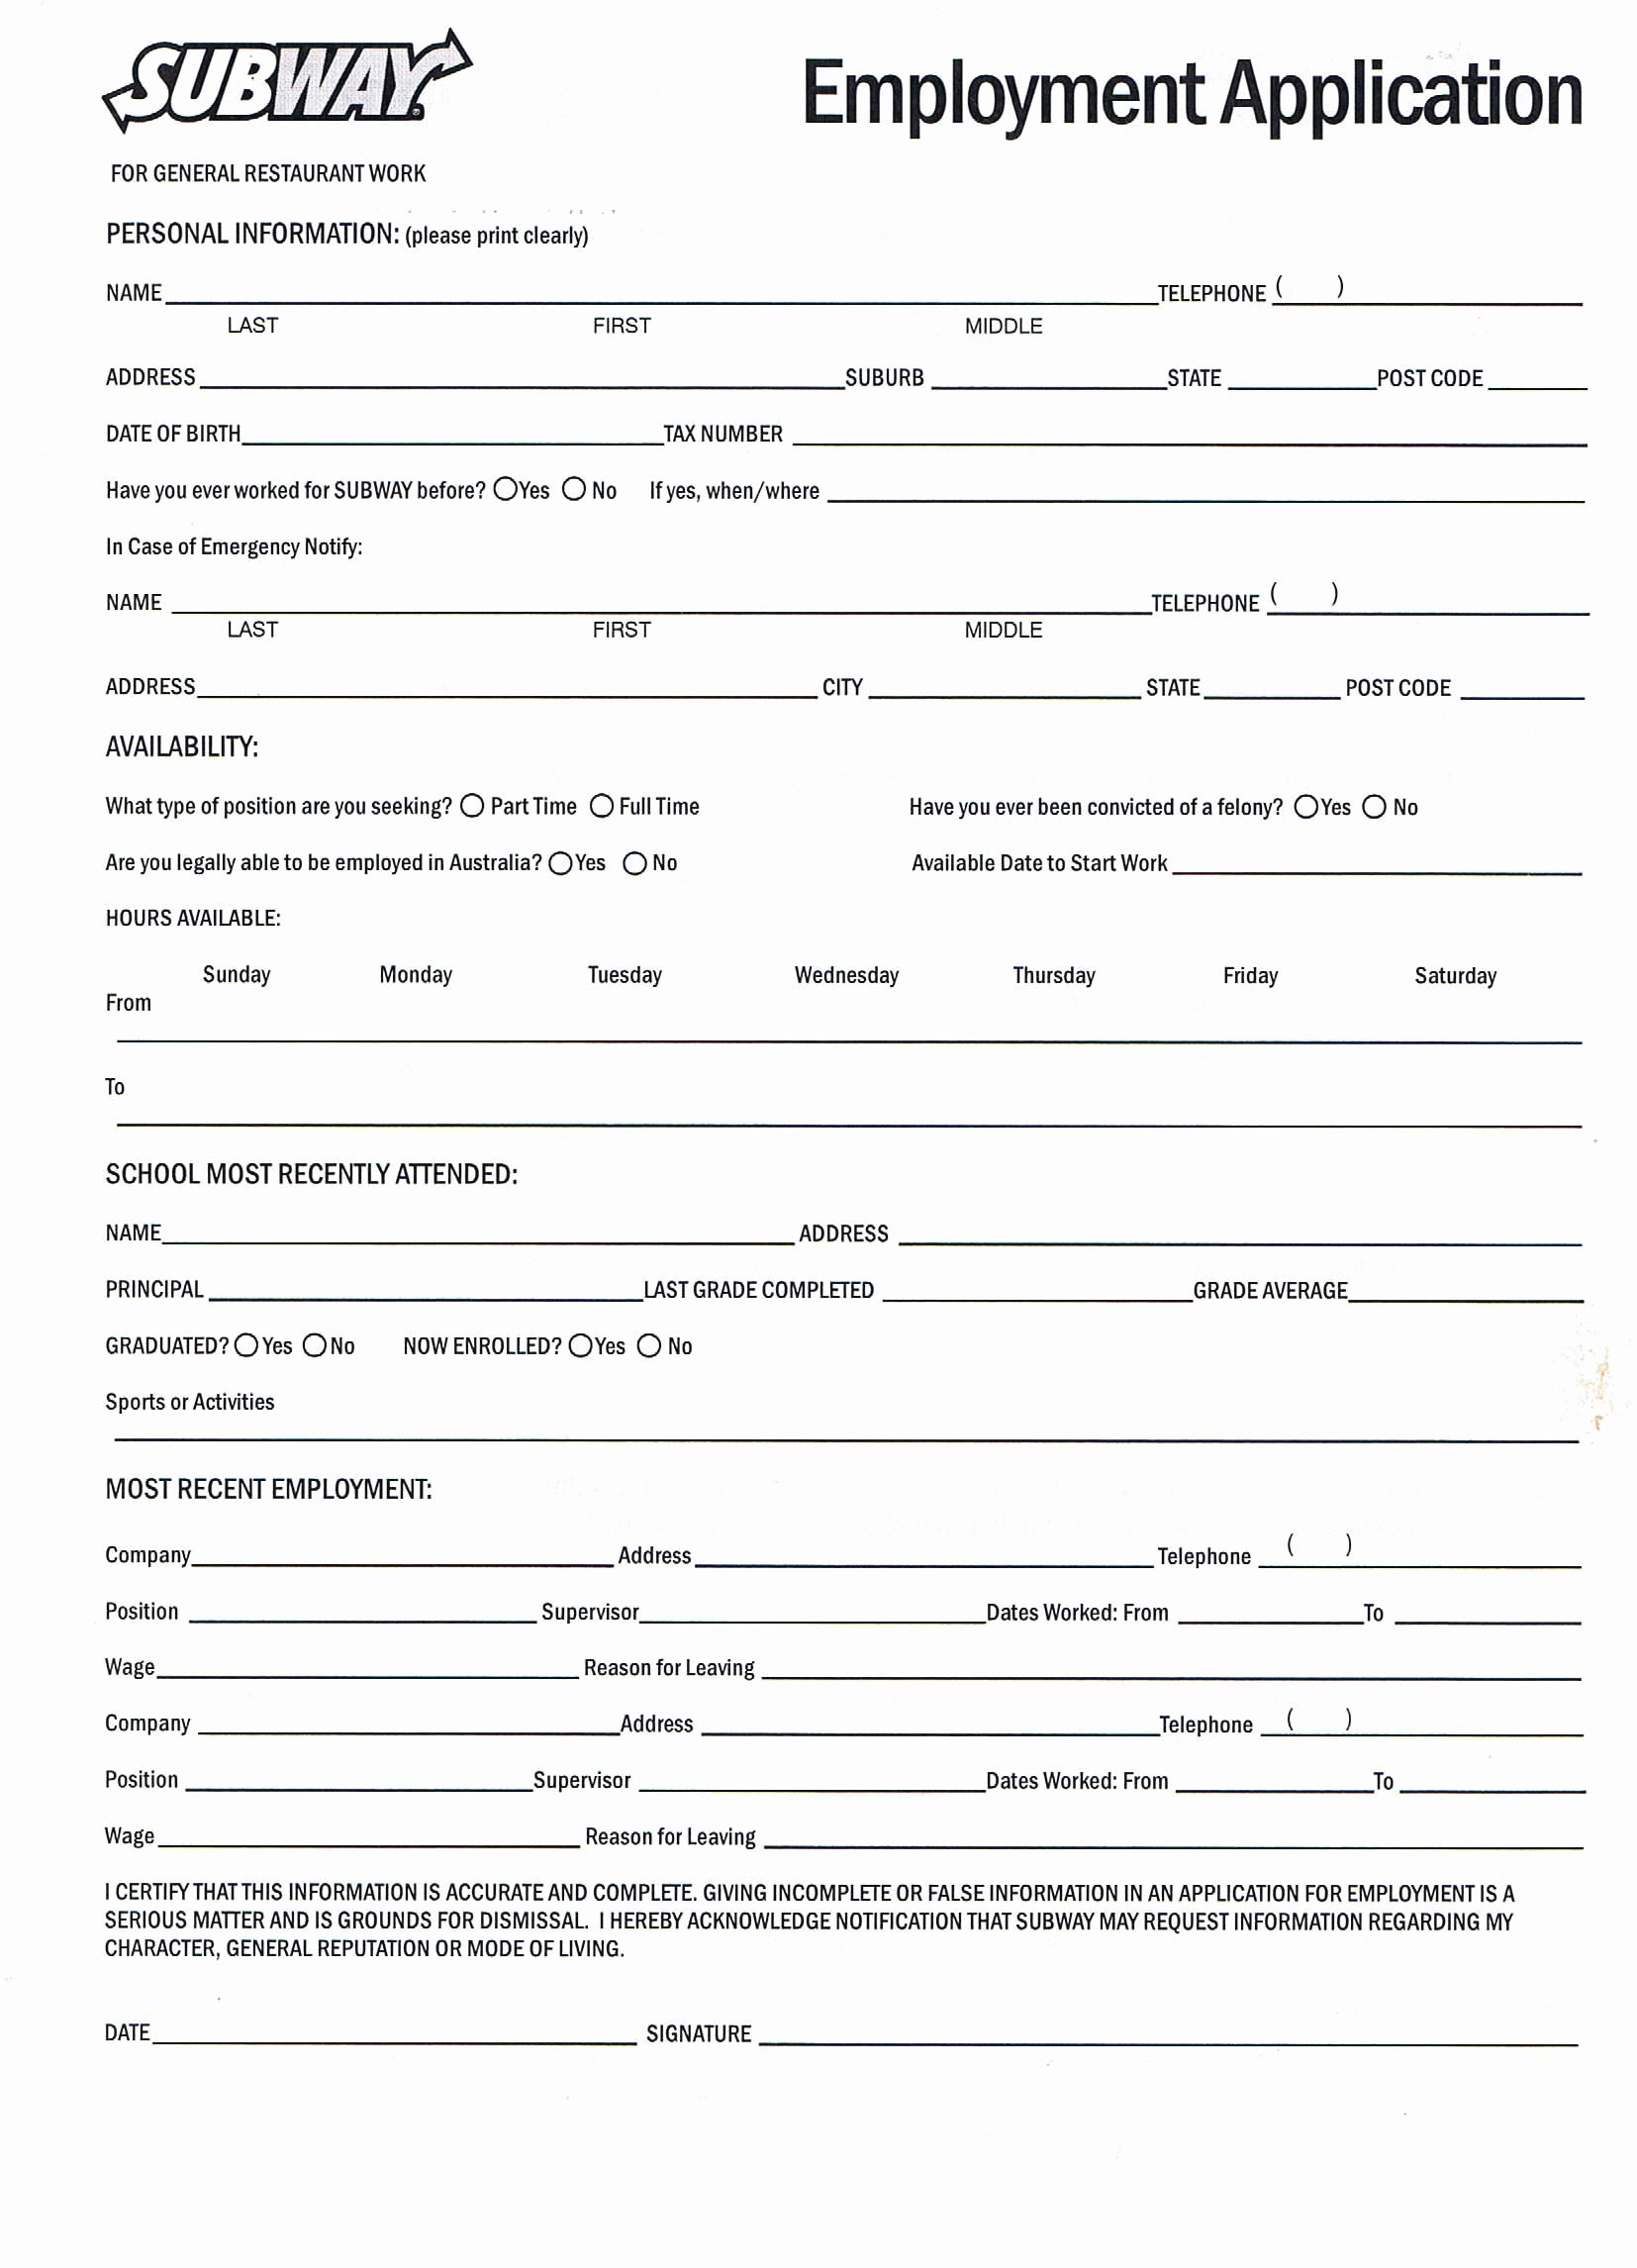 Jobs Application form Pdf Awesome Printable Job Application forms Online forms Download and